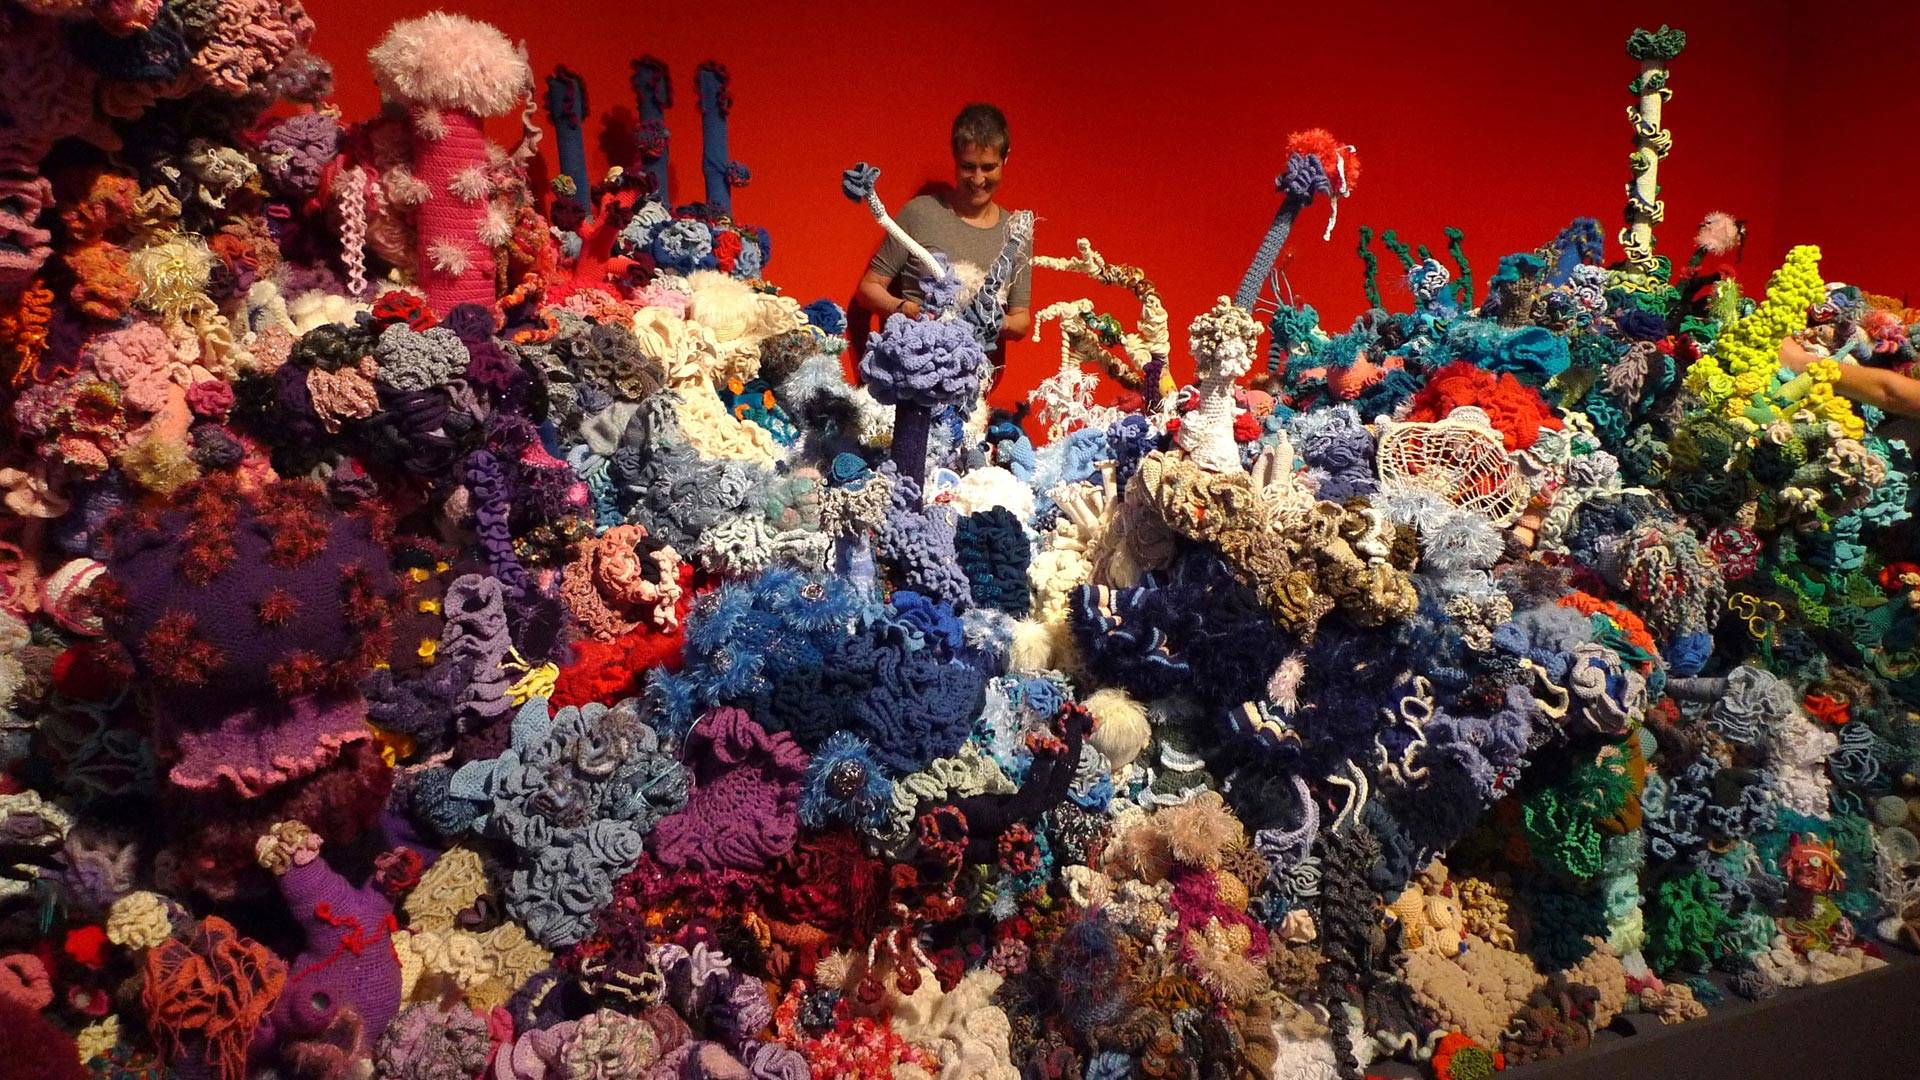 Margaret Wertheim, engulfed in the Föhr Reef, (Museum Kunst der Westküste, Föhr, Germany, 2012). A similar exhibition she co-created, called The Crochet Coral Reef, is on view the Mary Porter Sesnon Art Gallery at UC Santa Cruz.  Photo: Courtesy of Steve Kurtz